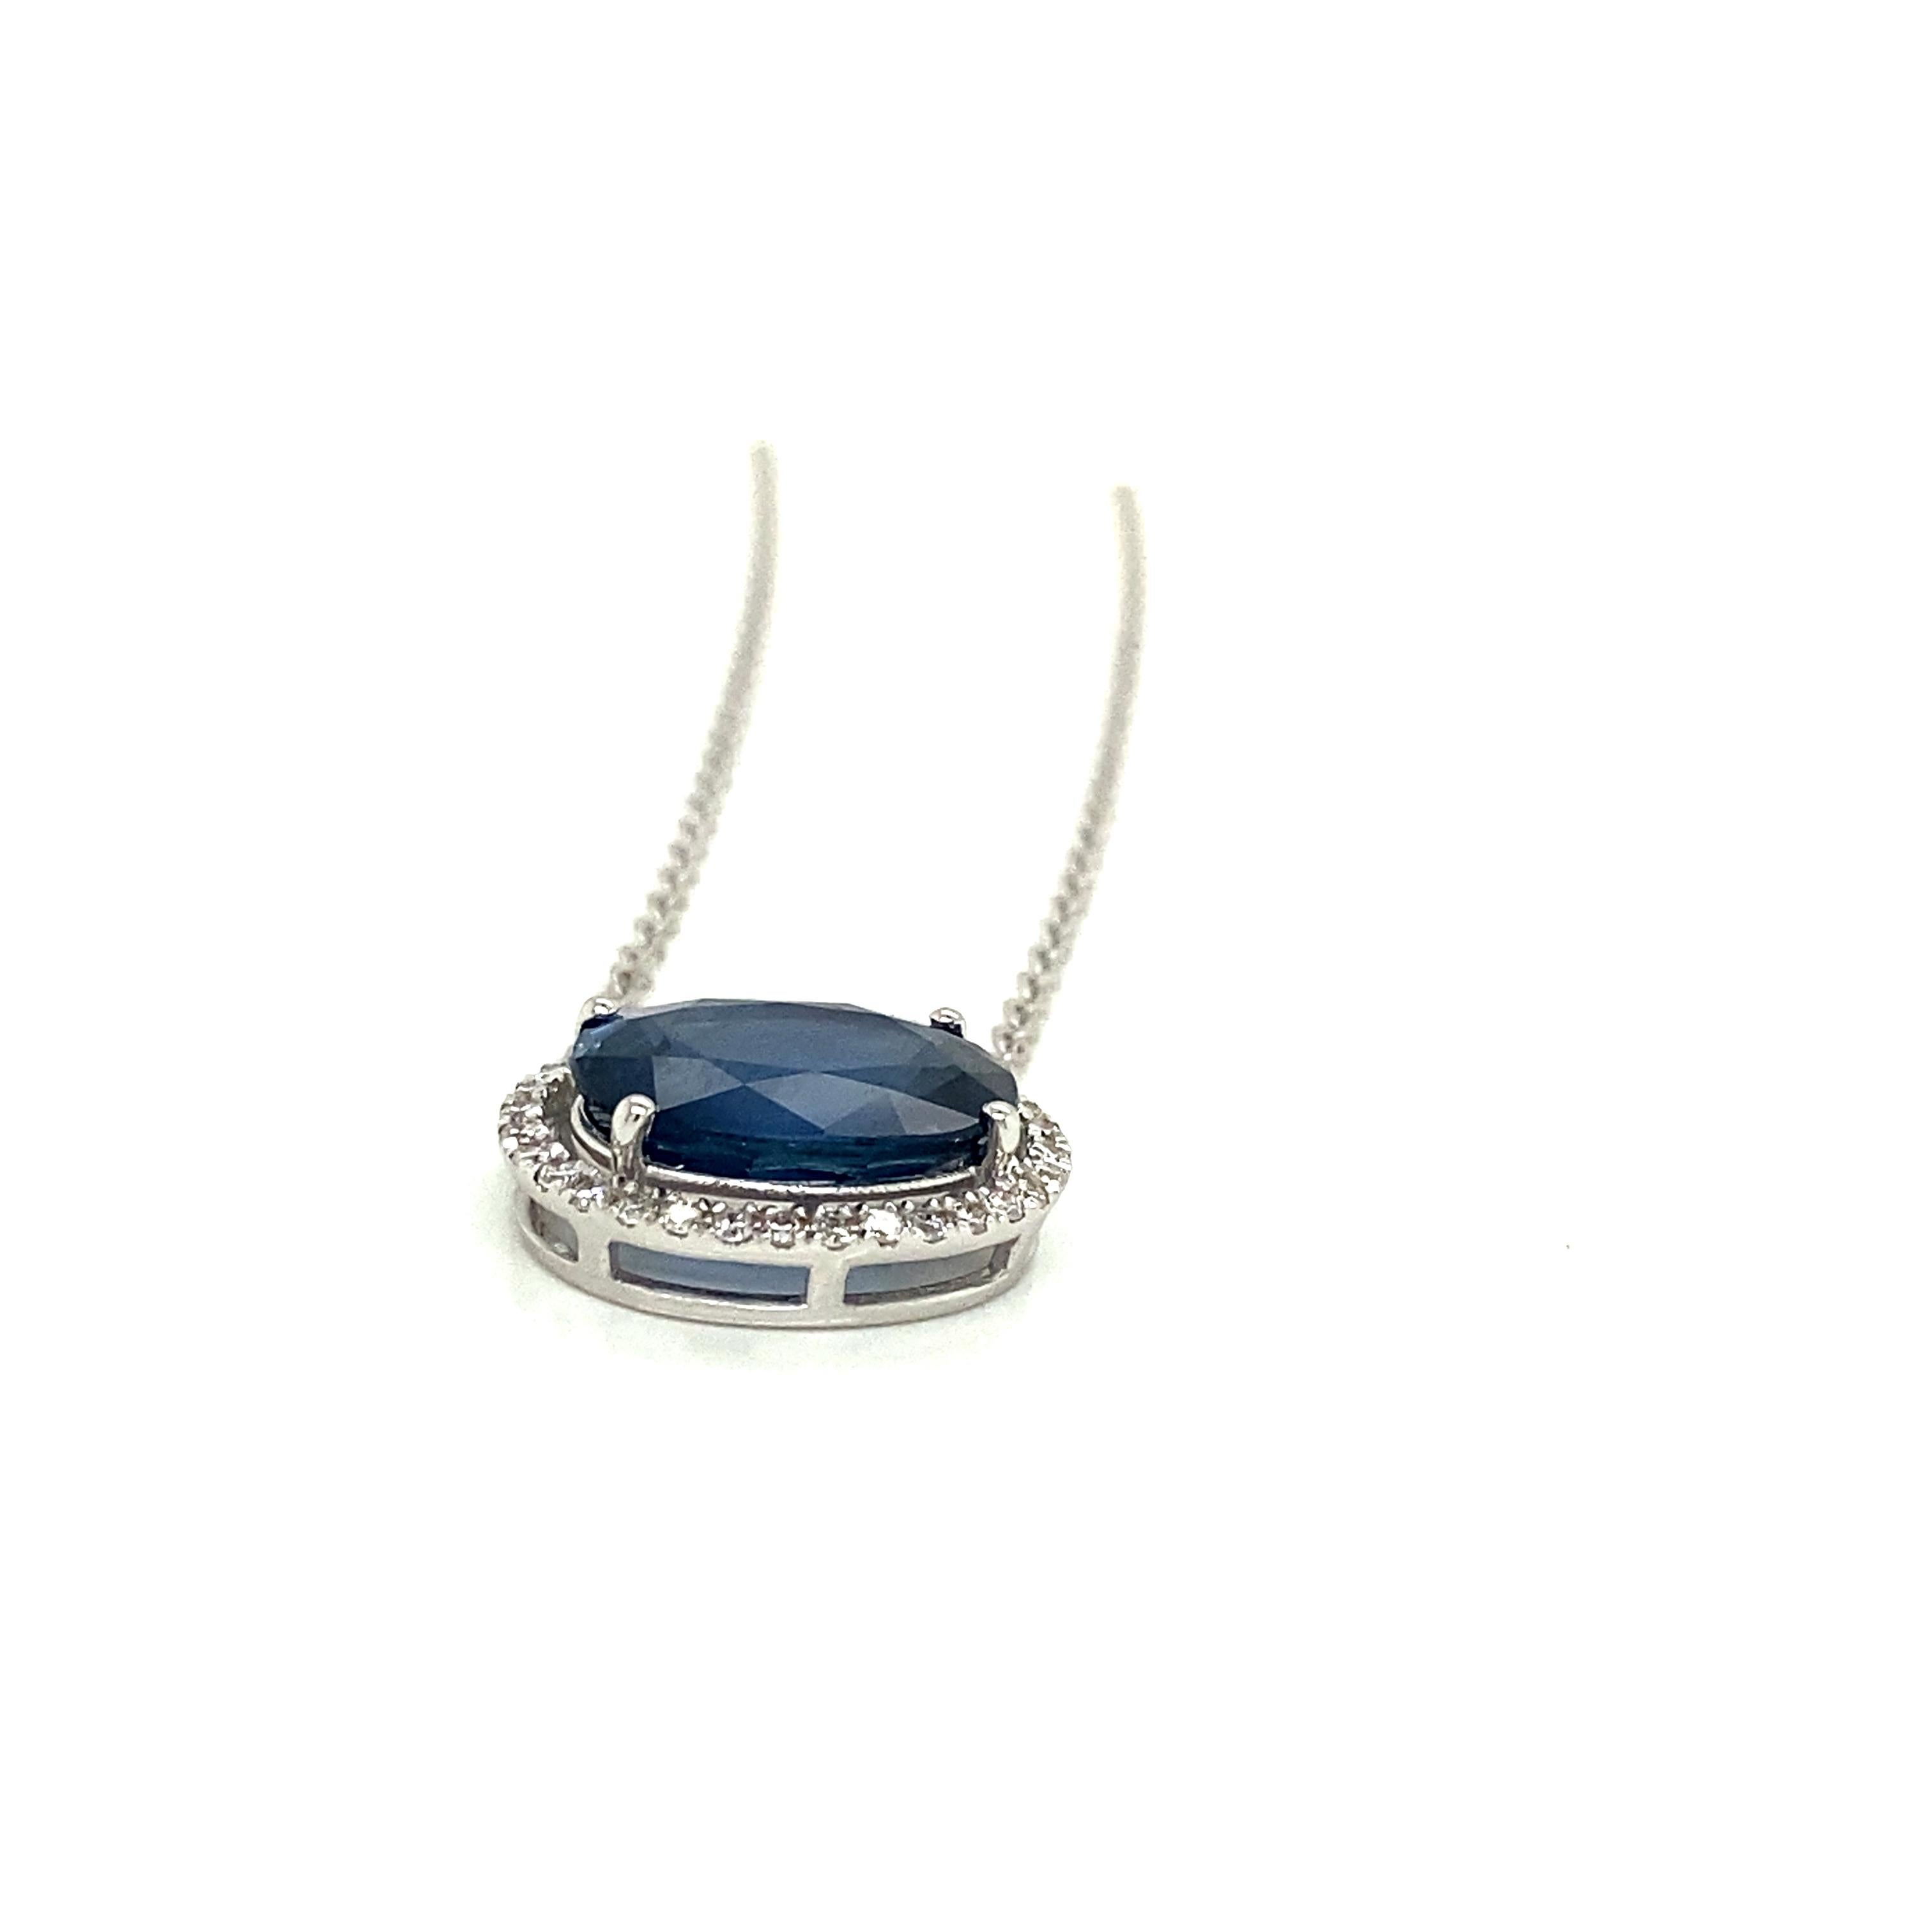 4.96 Carat Oval-Cut Vivid Blue Sapphire and White Diamond Pendant Necklace:

A beautiful pendant necklace, it features a 4.96 carat oval-cut vivid blue sapphire in the centre surrounded by a halo of white round-brilliant cut diamonds weighing 0.19